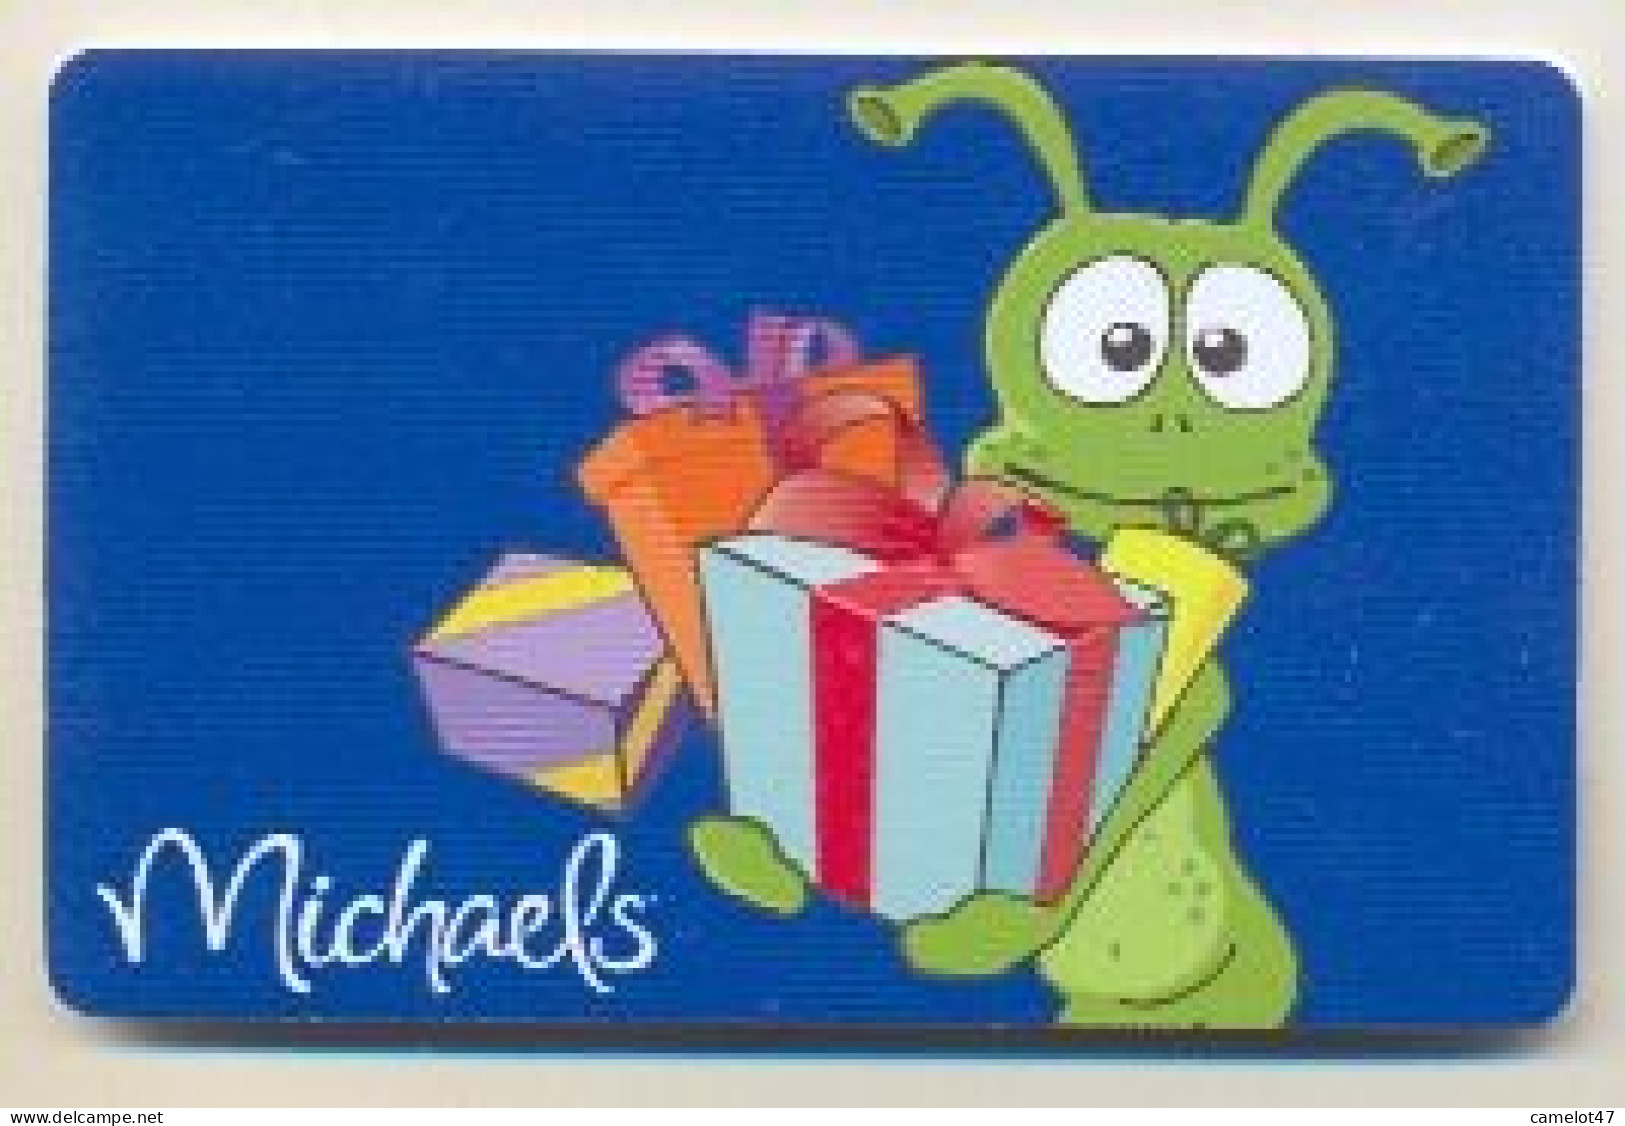 Michaels, U.S.A., Gift Card For Collection, No Value, # Michaels-12 - Gift Cards